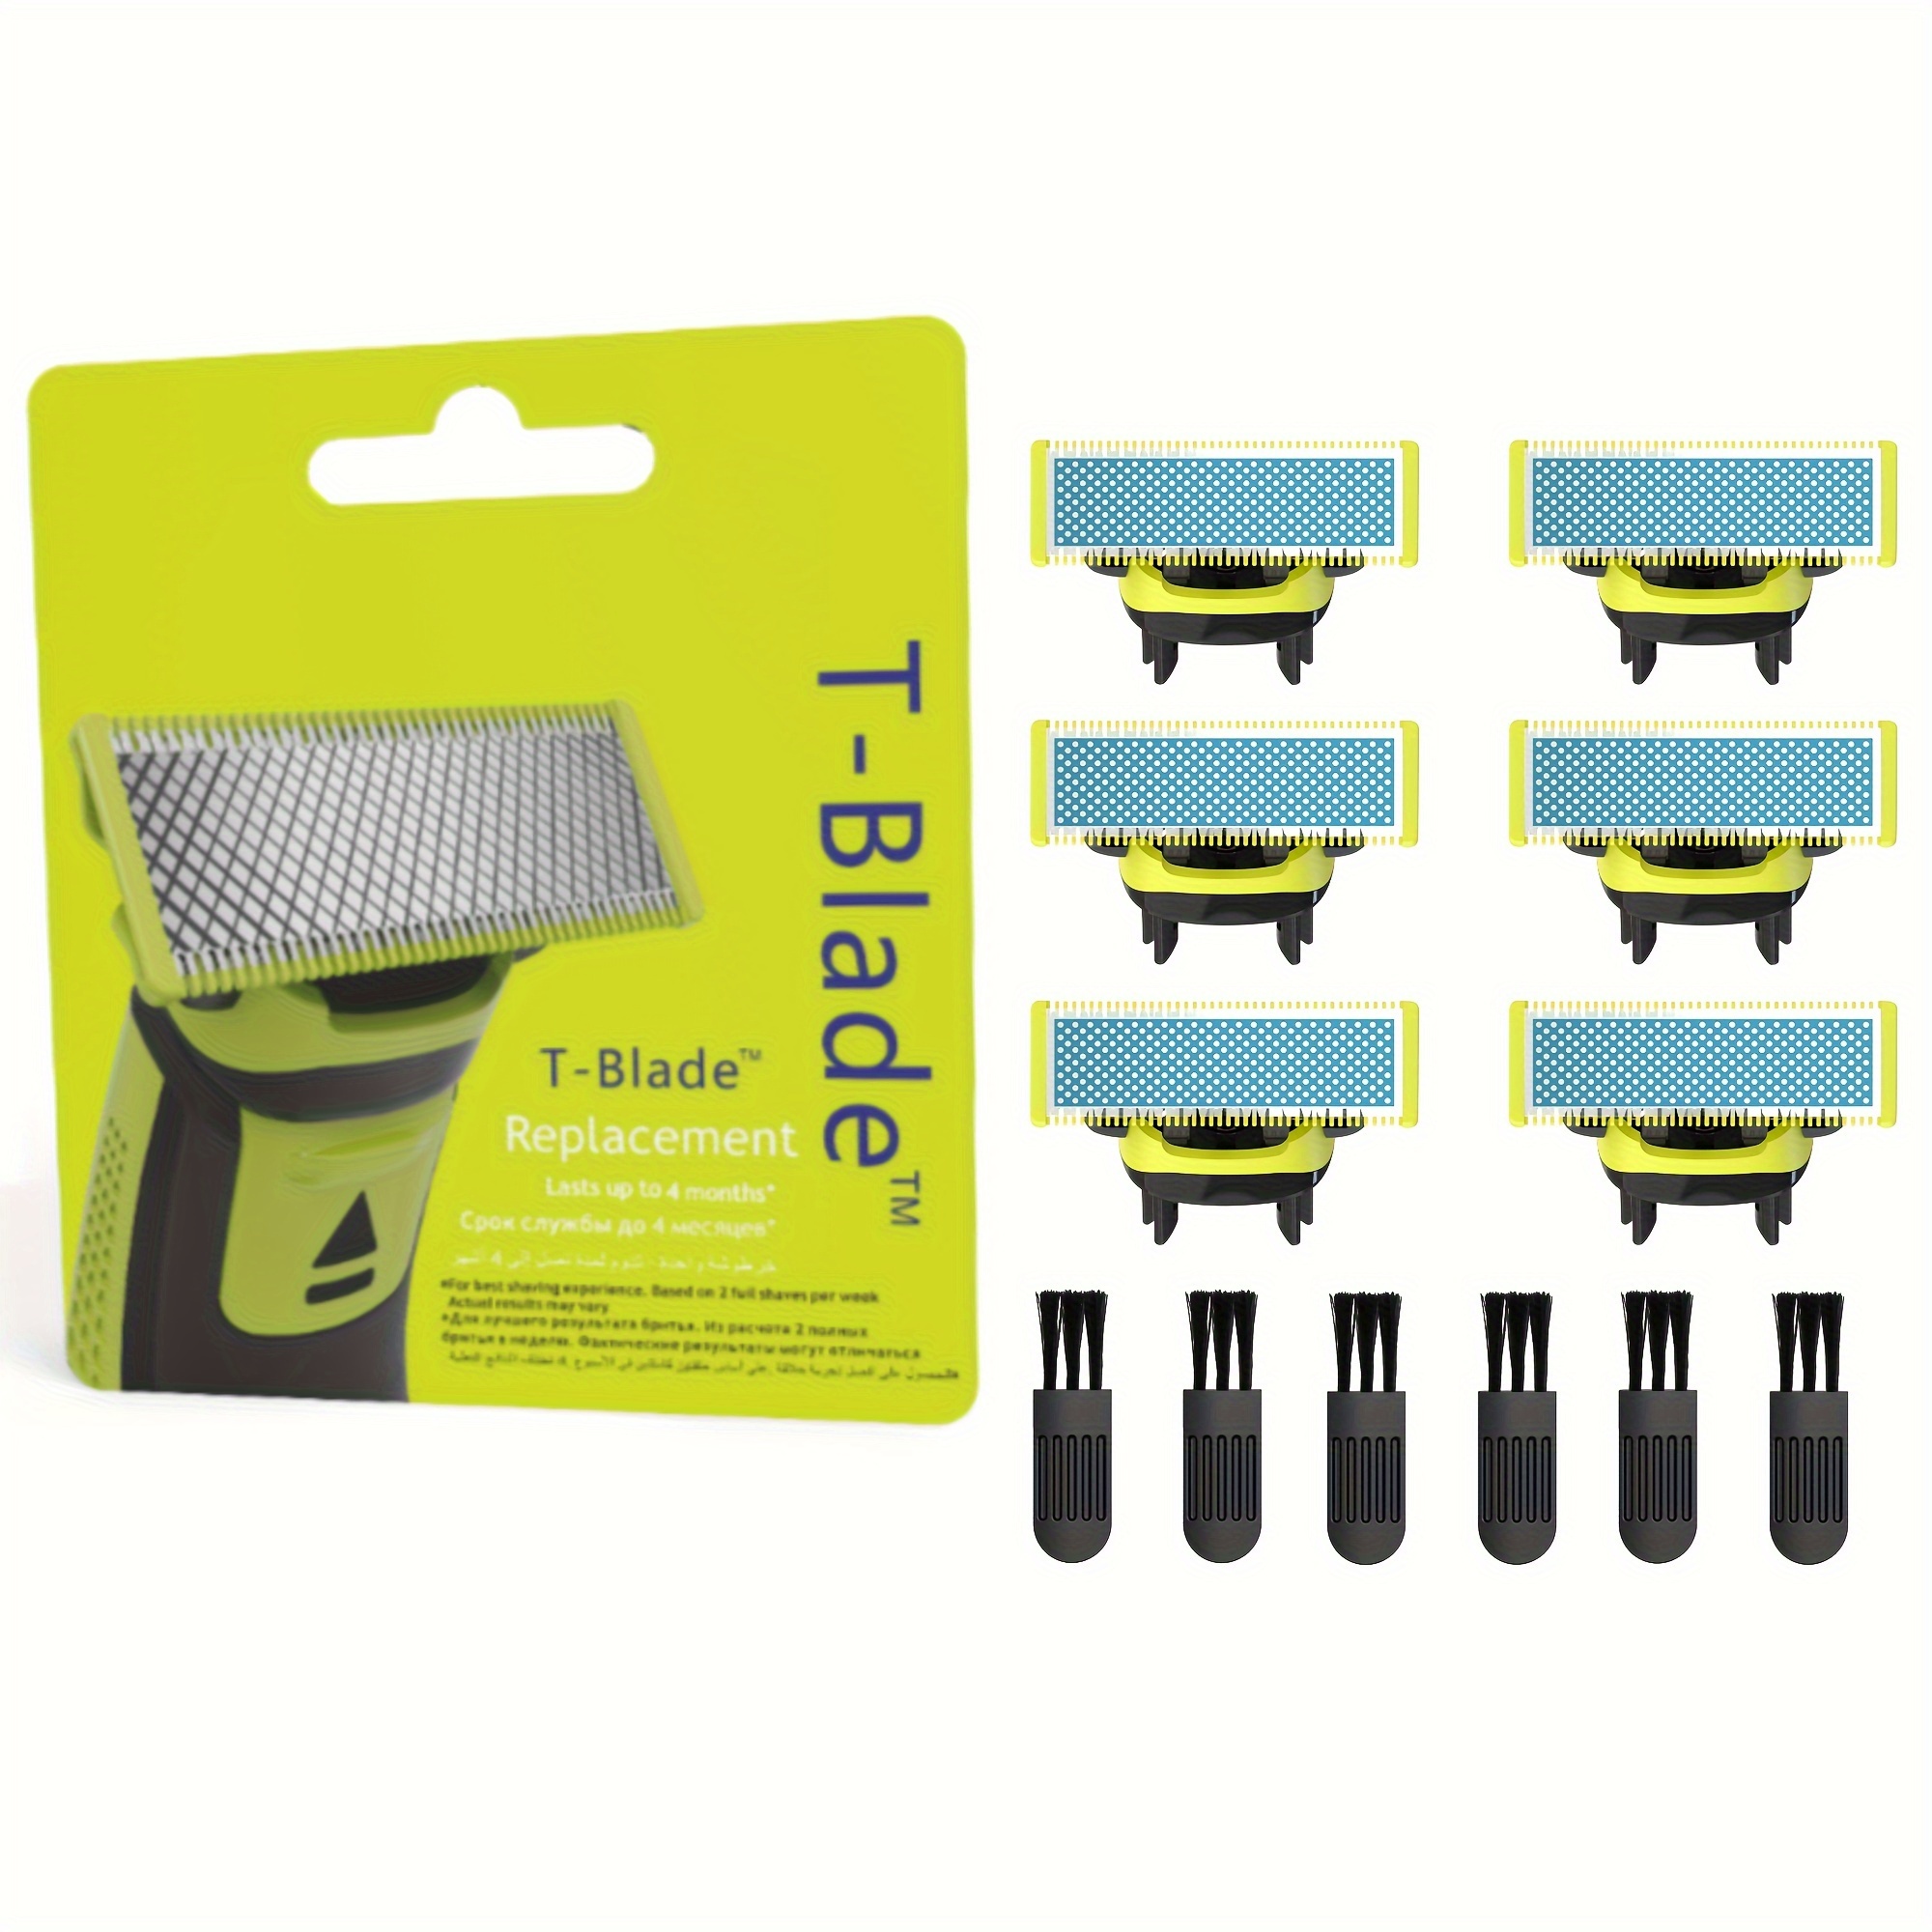 

Oneblade T-blade Replacement Heads & Cleaning Brush Kit - Anti-friction, Hypoallergenic, Compatible With Qp2520/qp2530/qp2620/qp2630/qp6510/qp6520 - Blue, 2/4/6/8 Piece Options